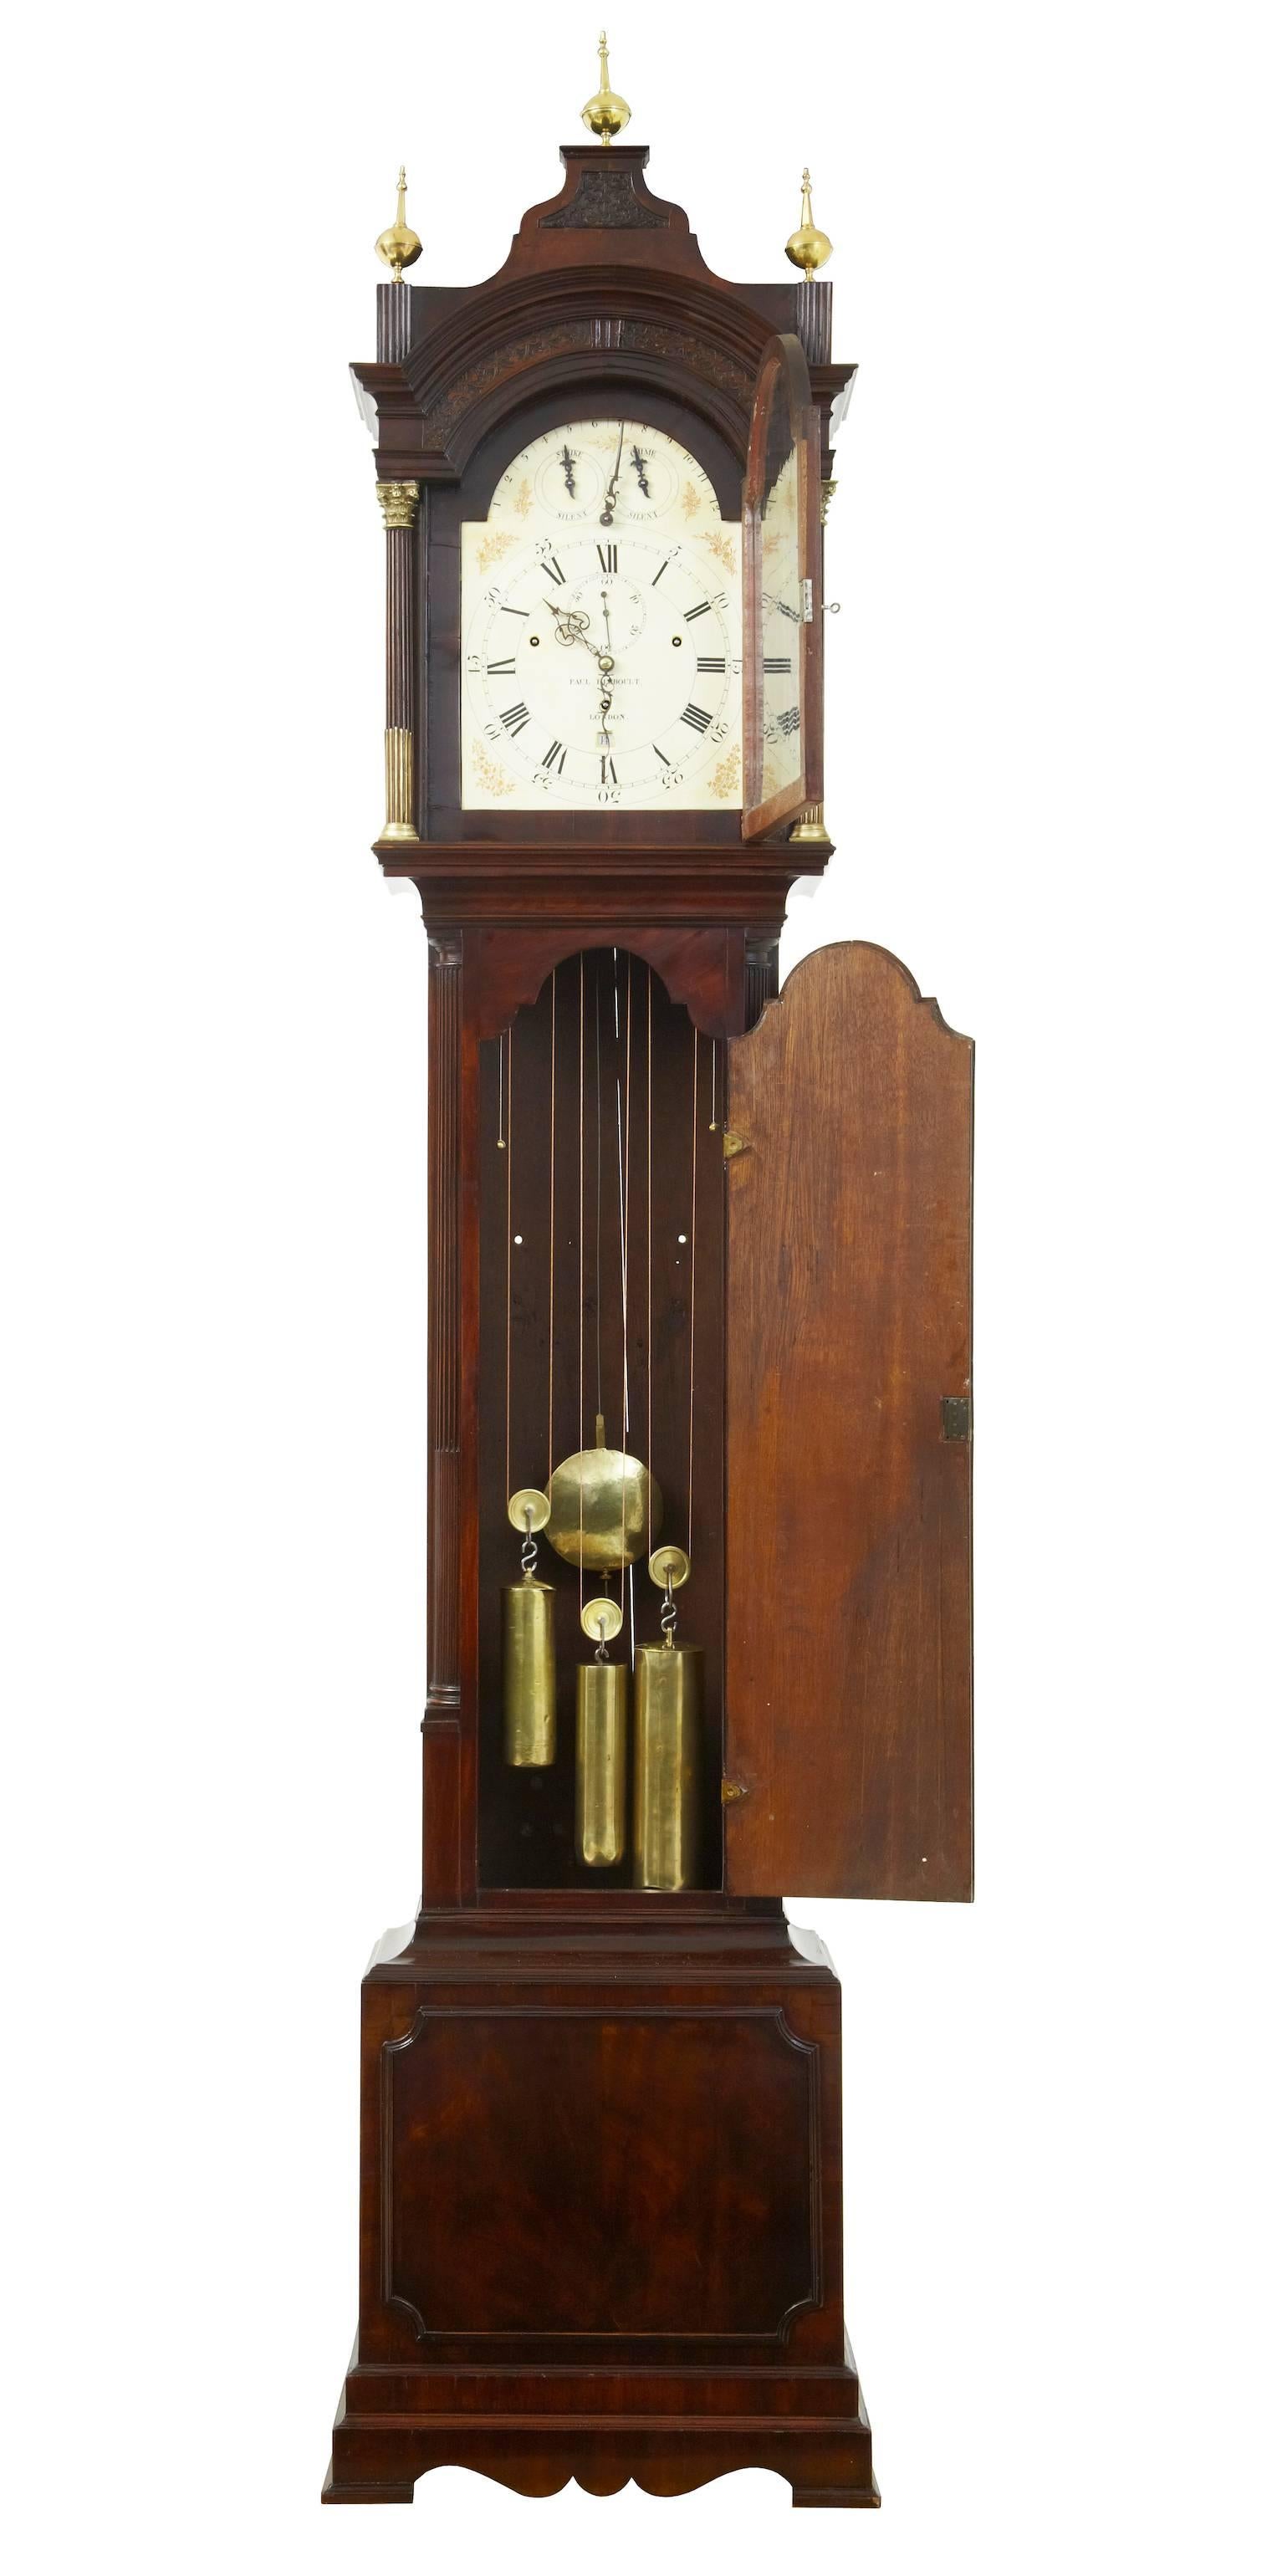 18th century flame mahogany musical longcase clock by Rimbault

Fine quality maker who is recorded in the 'watchmakers & clockmakers of the world volume 1' by G H baillie

It is a true musical longcase clock dating from the late 18th century